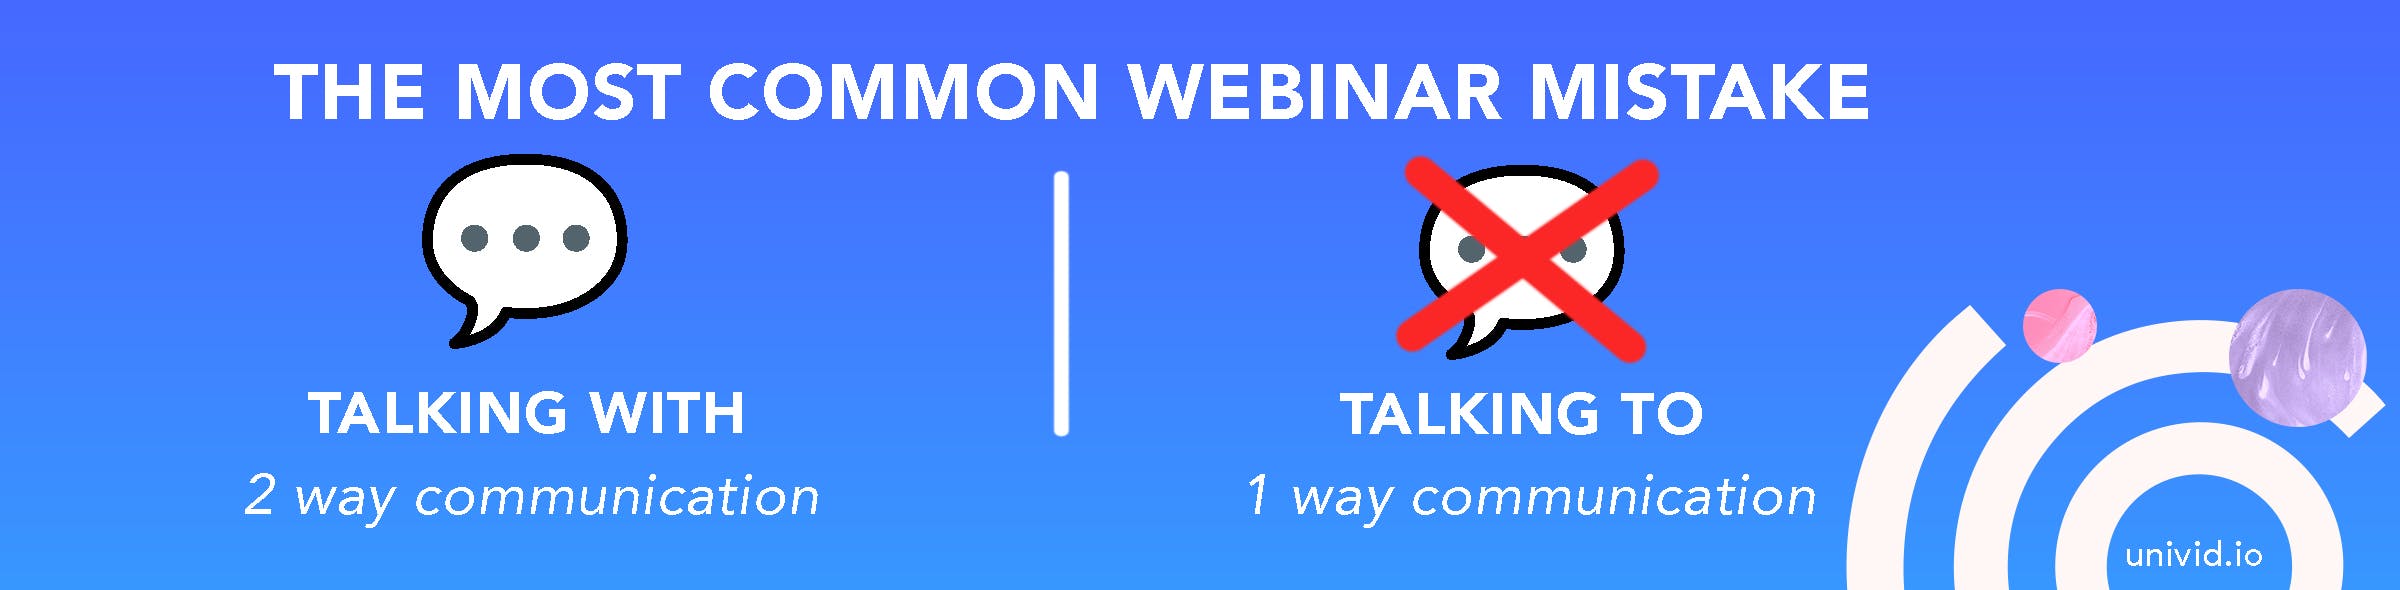 The most common webinar mistake